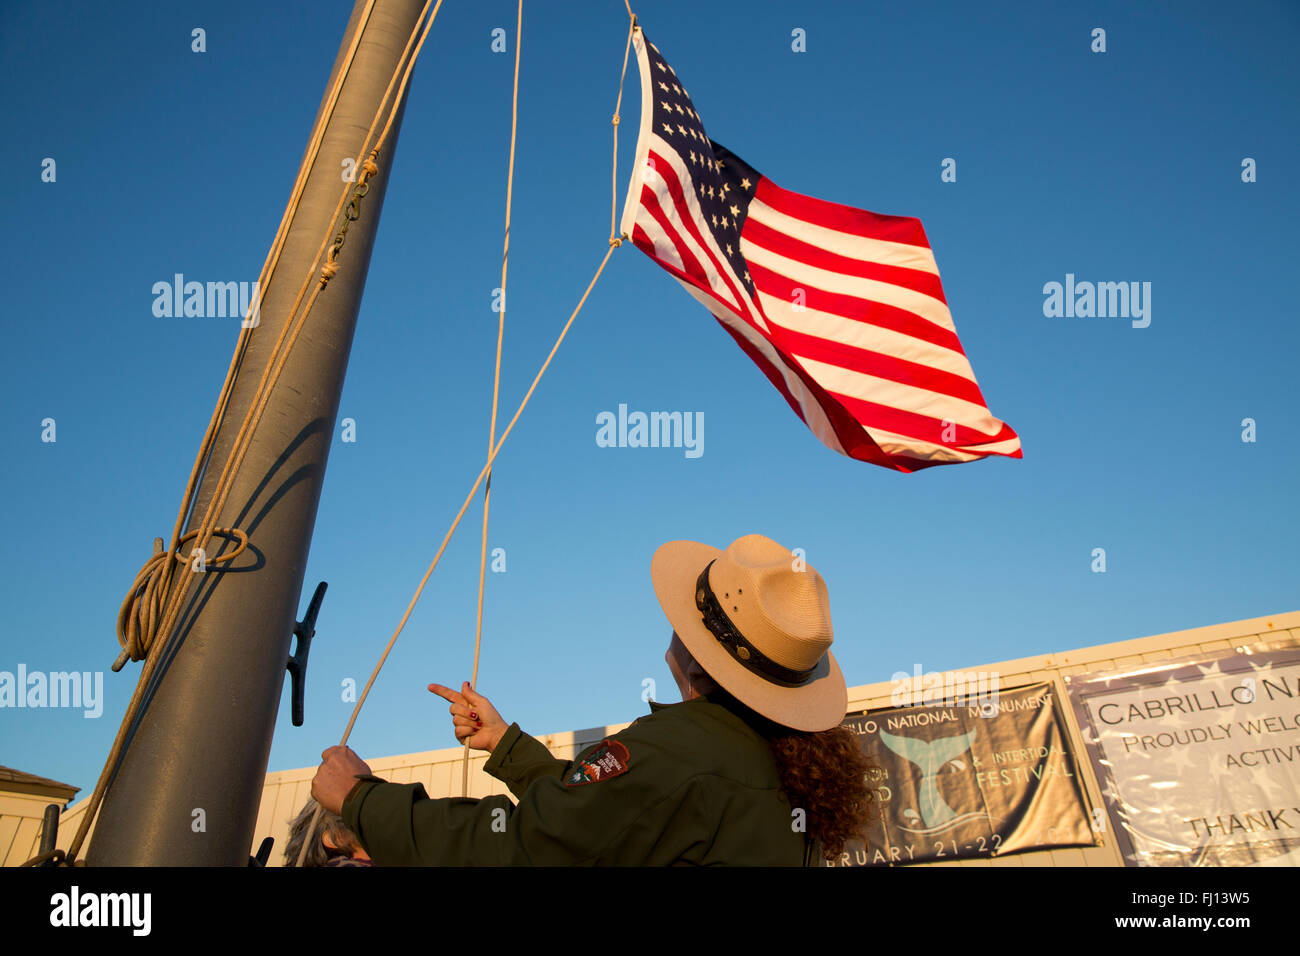 A park ranger lowers the flag, Cabrillo National Monument, San Diego California Stock Photo